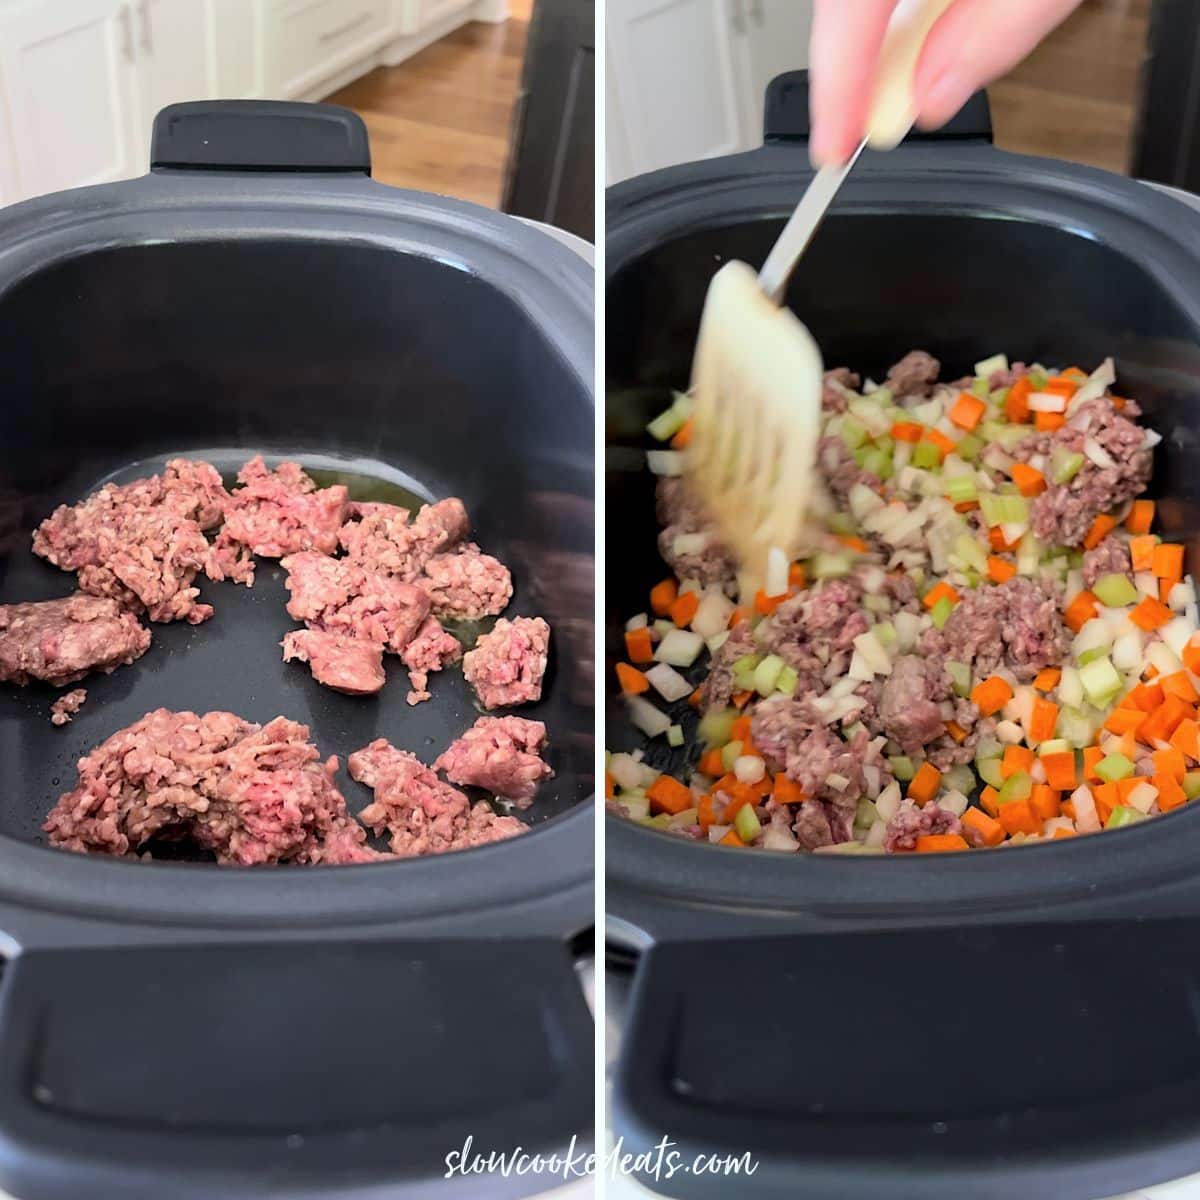 Browning ground beef and cooking vegetables in a black oval slow cooker.